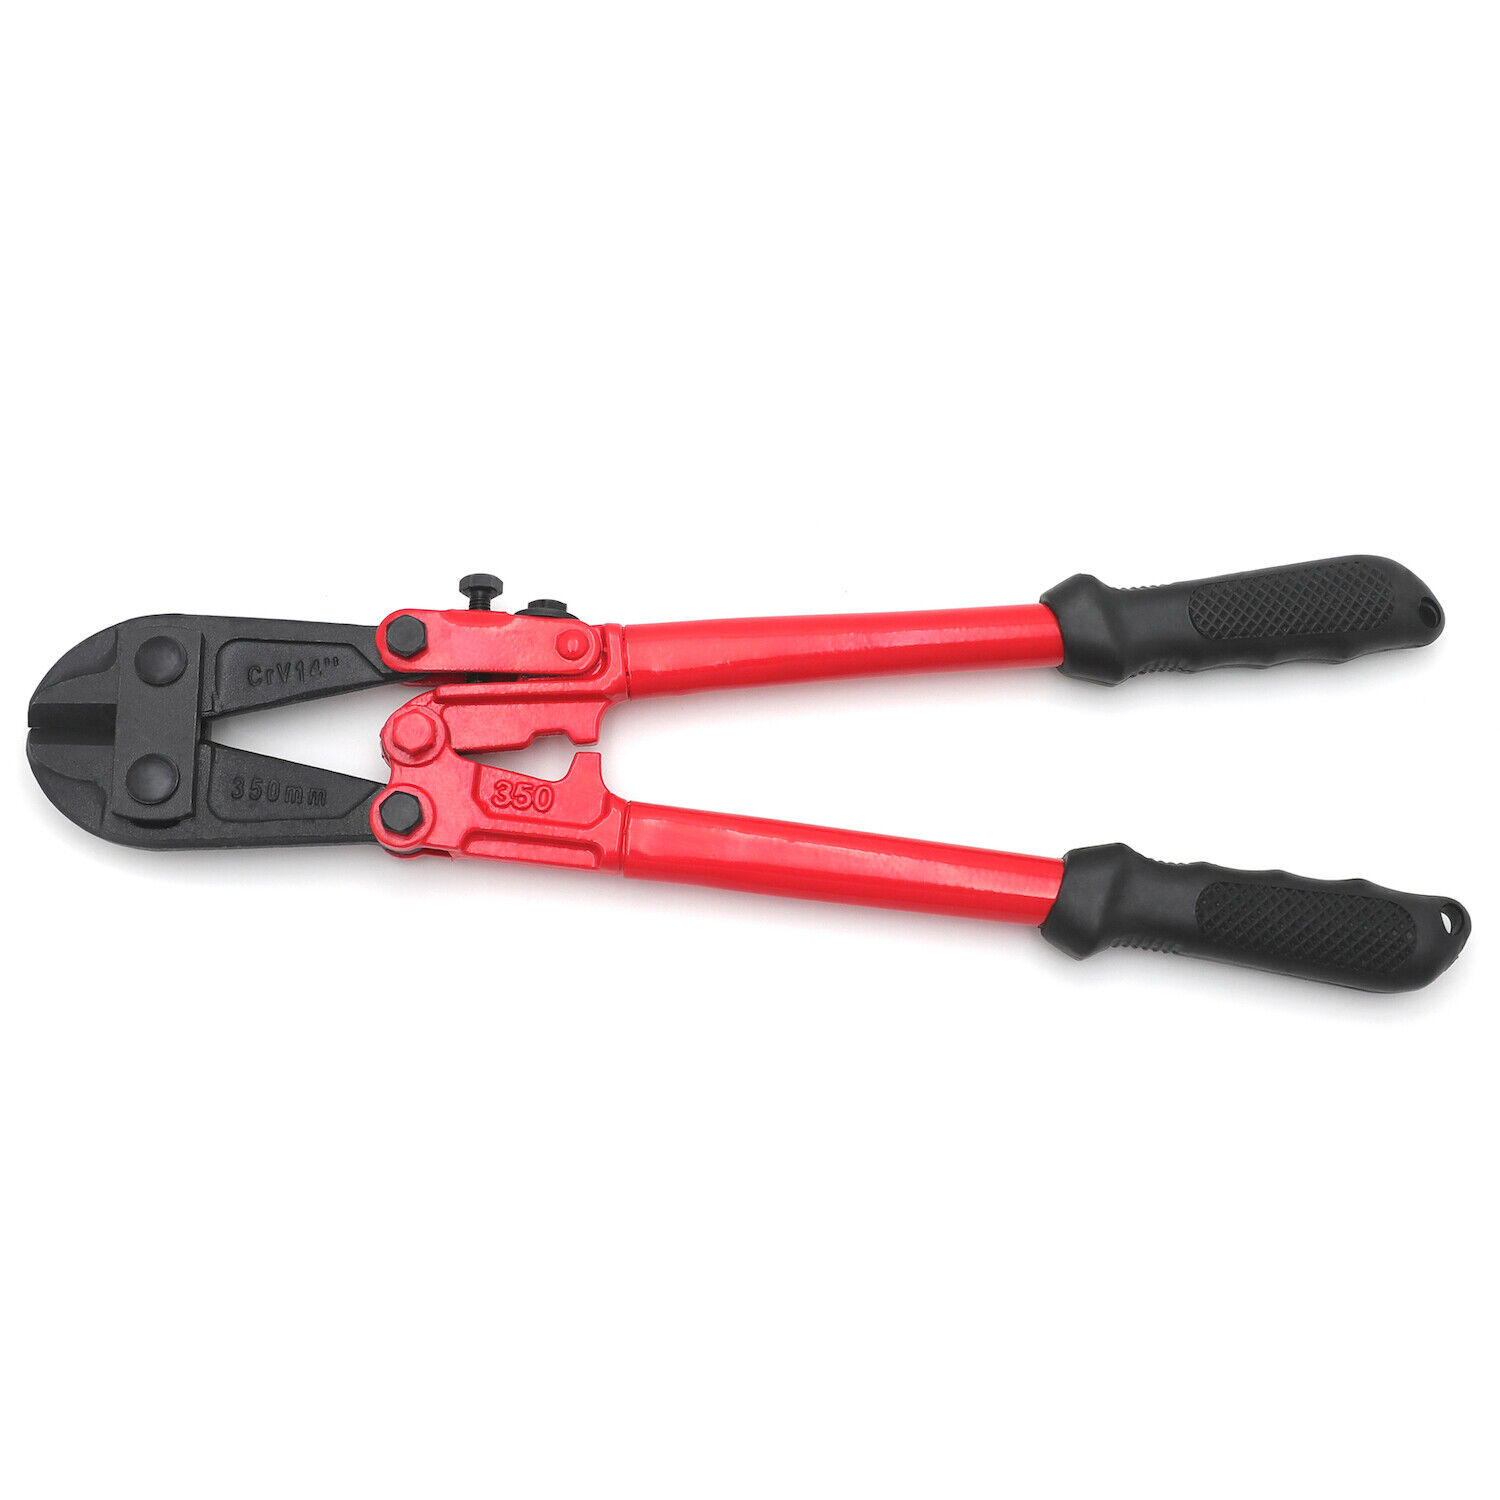 14" Bolt Cutter- Industrial Grade Wire Cut Steel Cable Cut Home